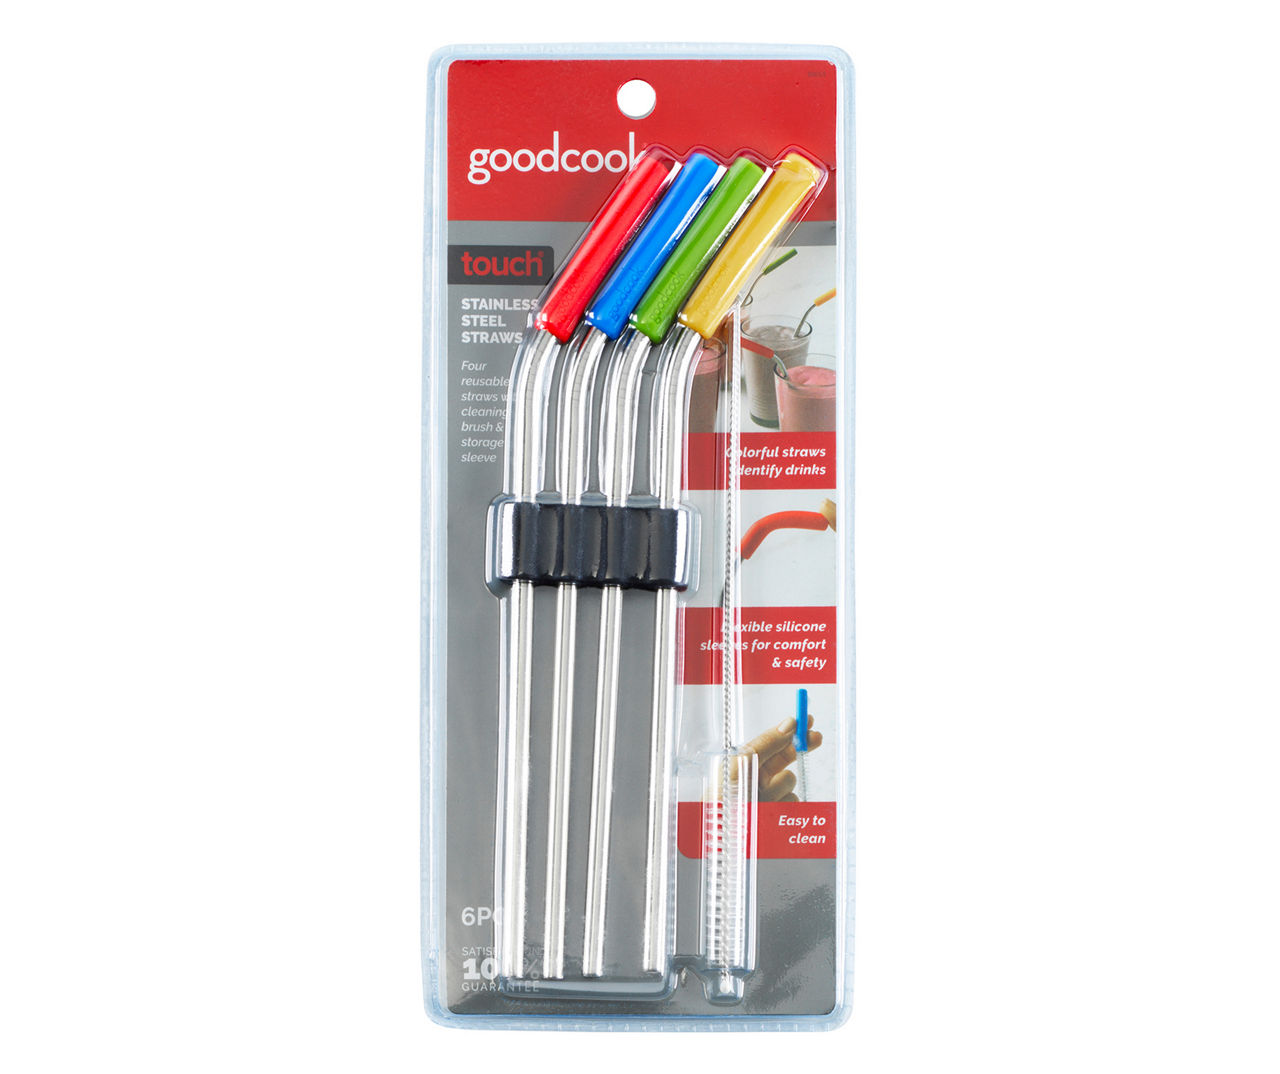 Goodcook Touch Straws, Stainless Steel